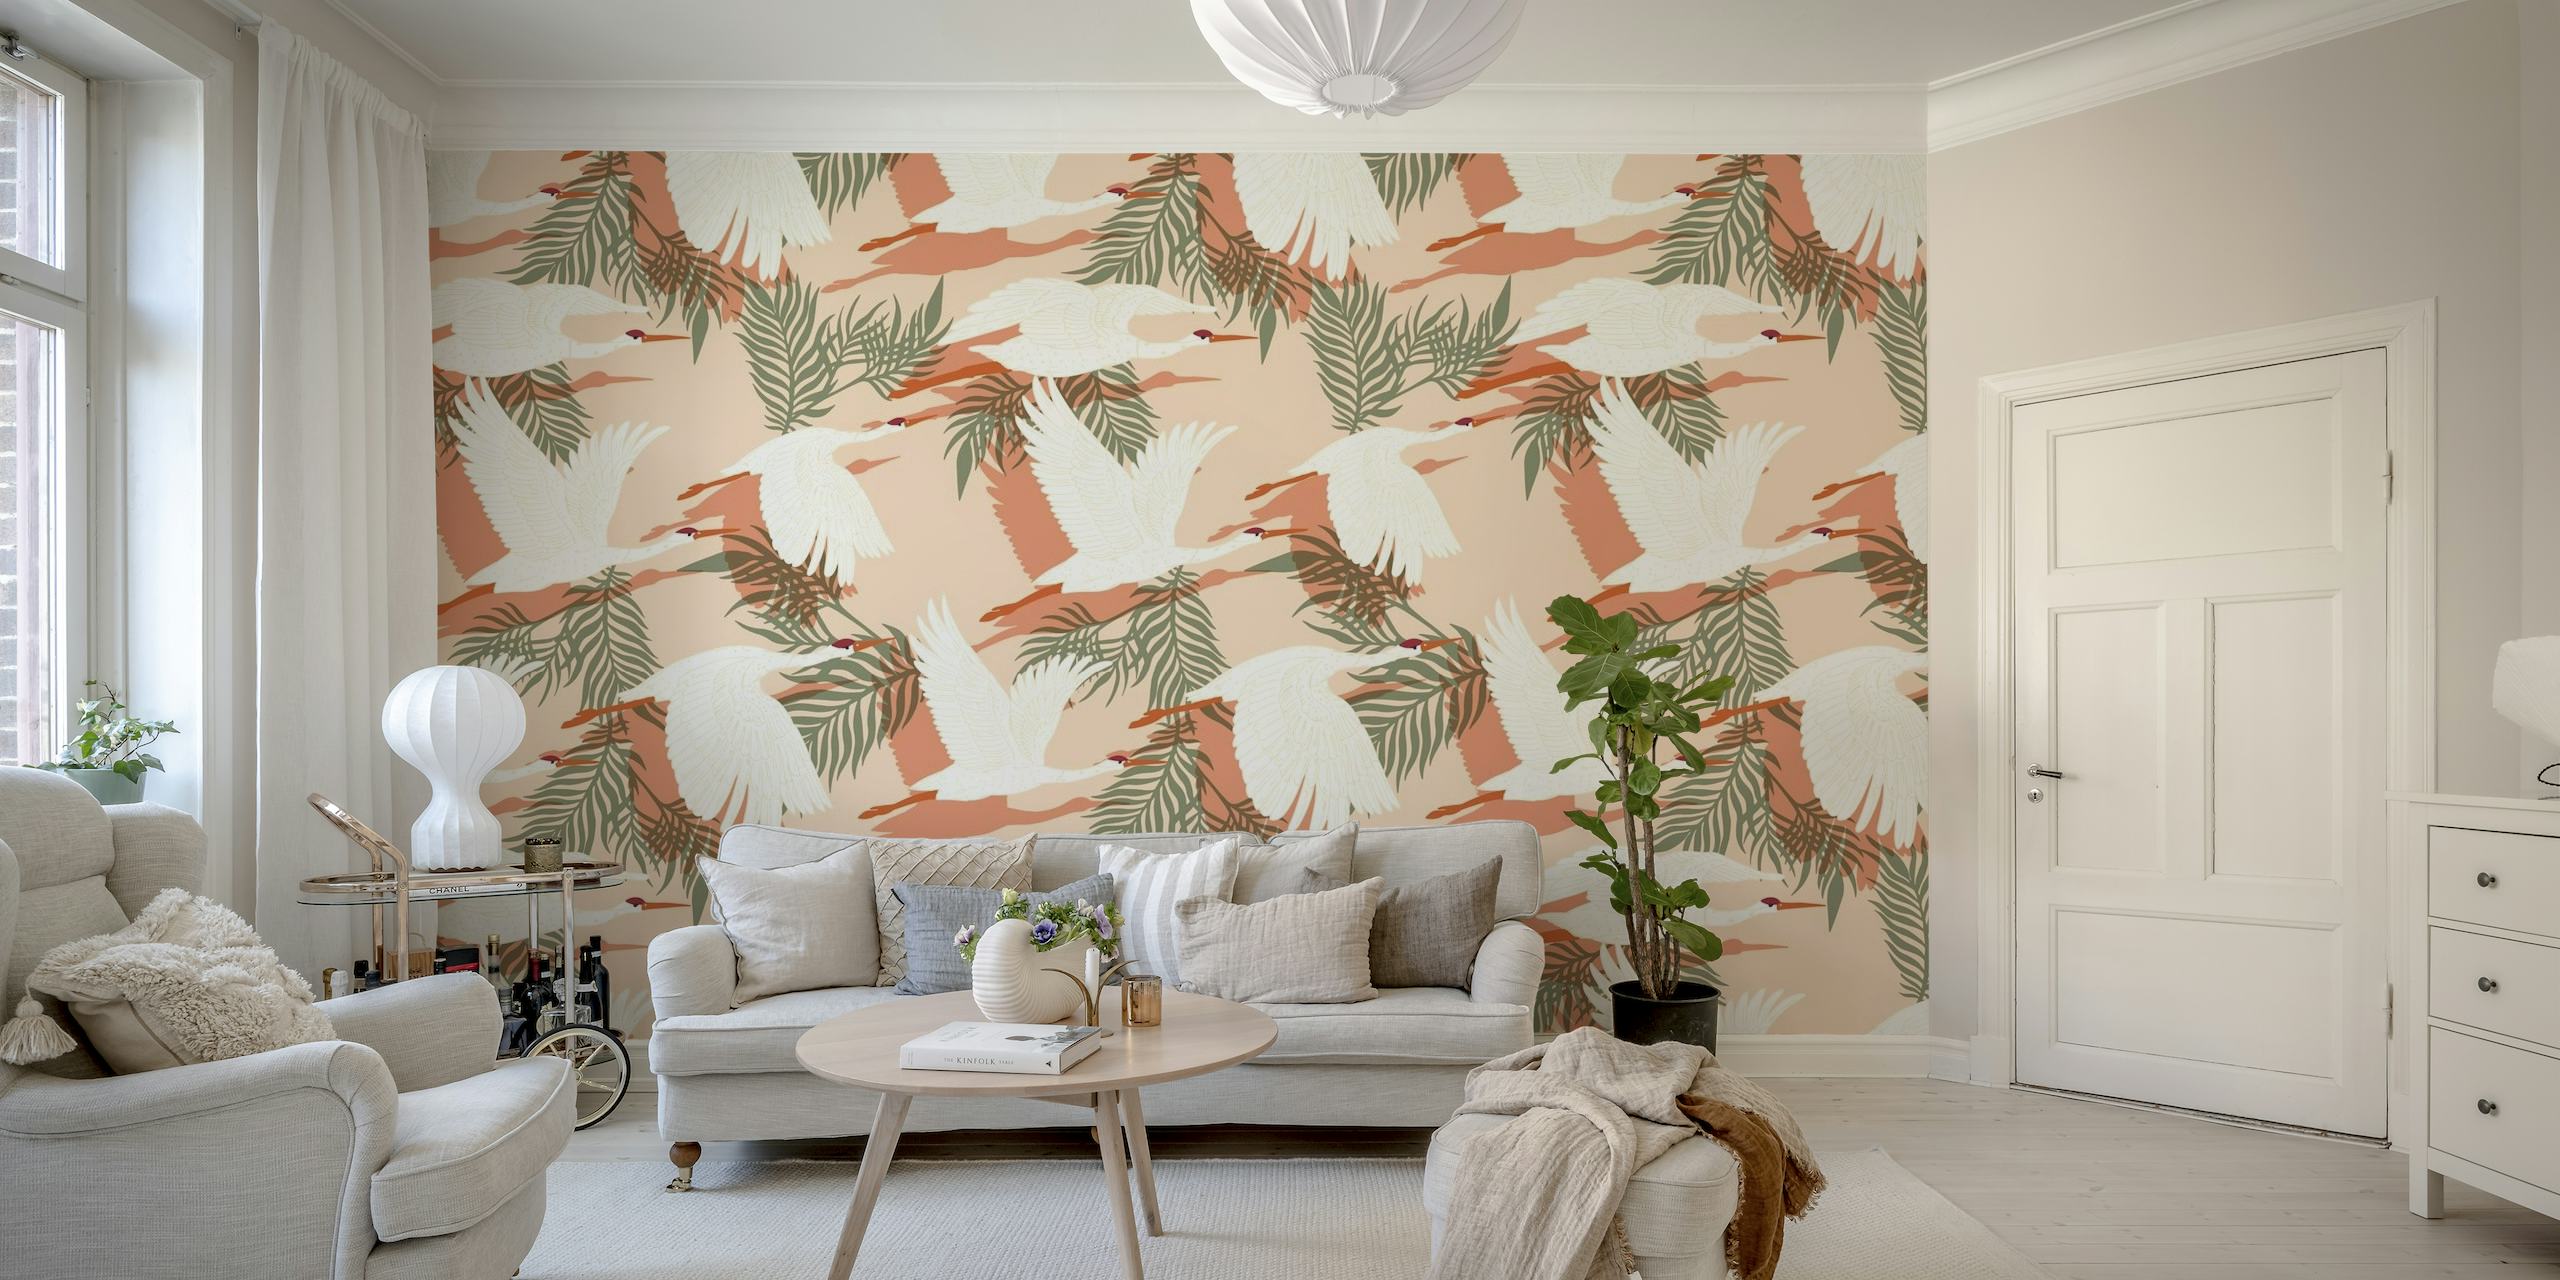 Pastel sunset wall mural with cranes in flight